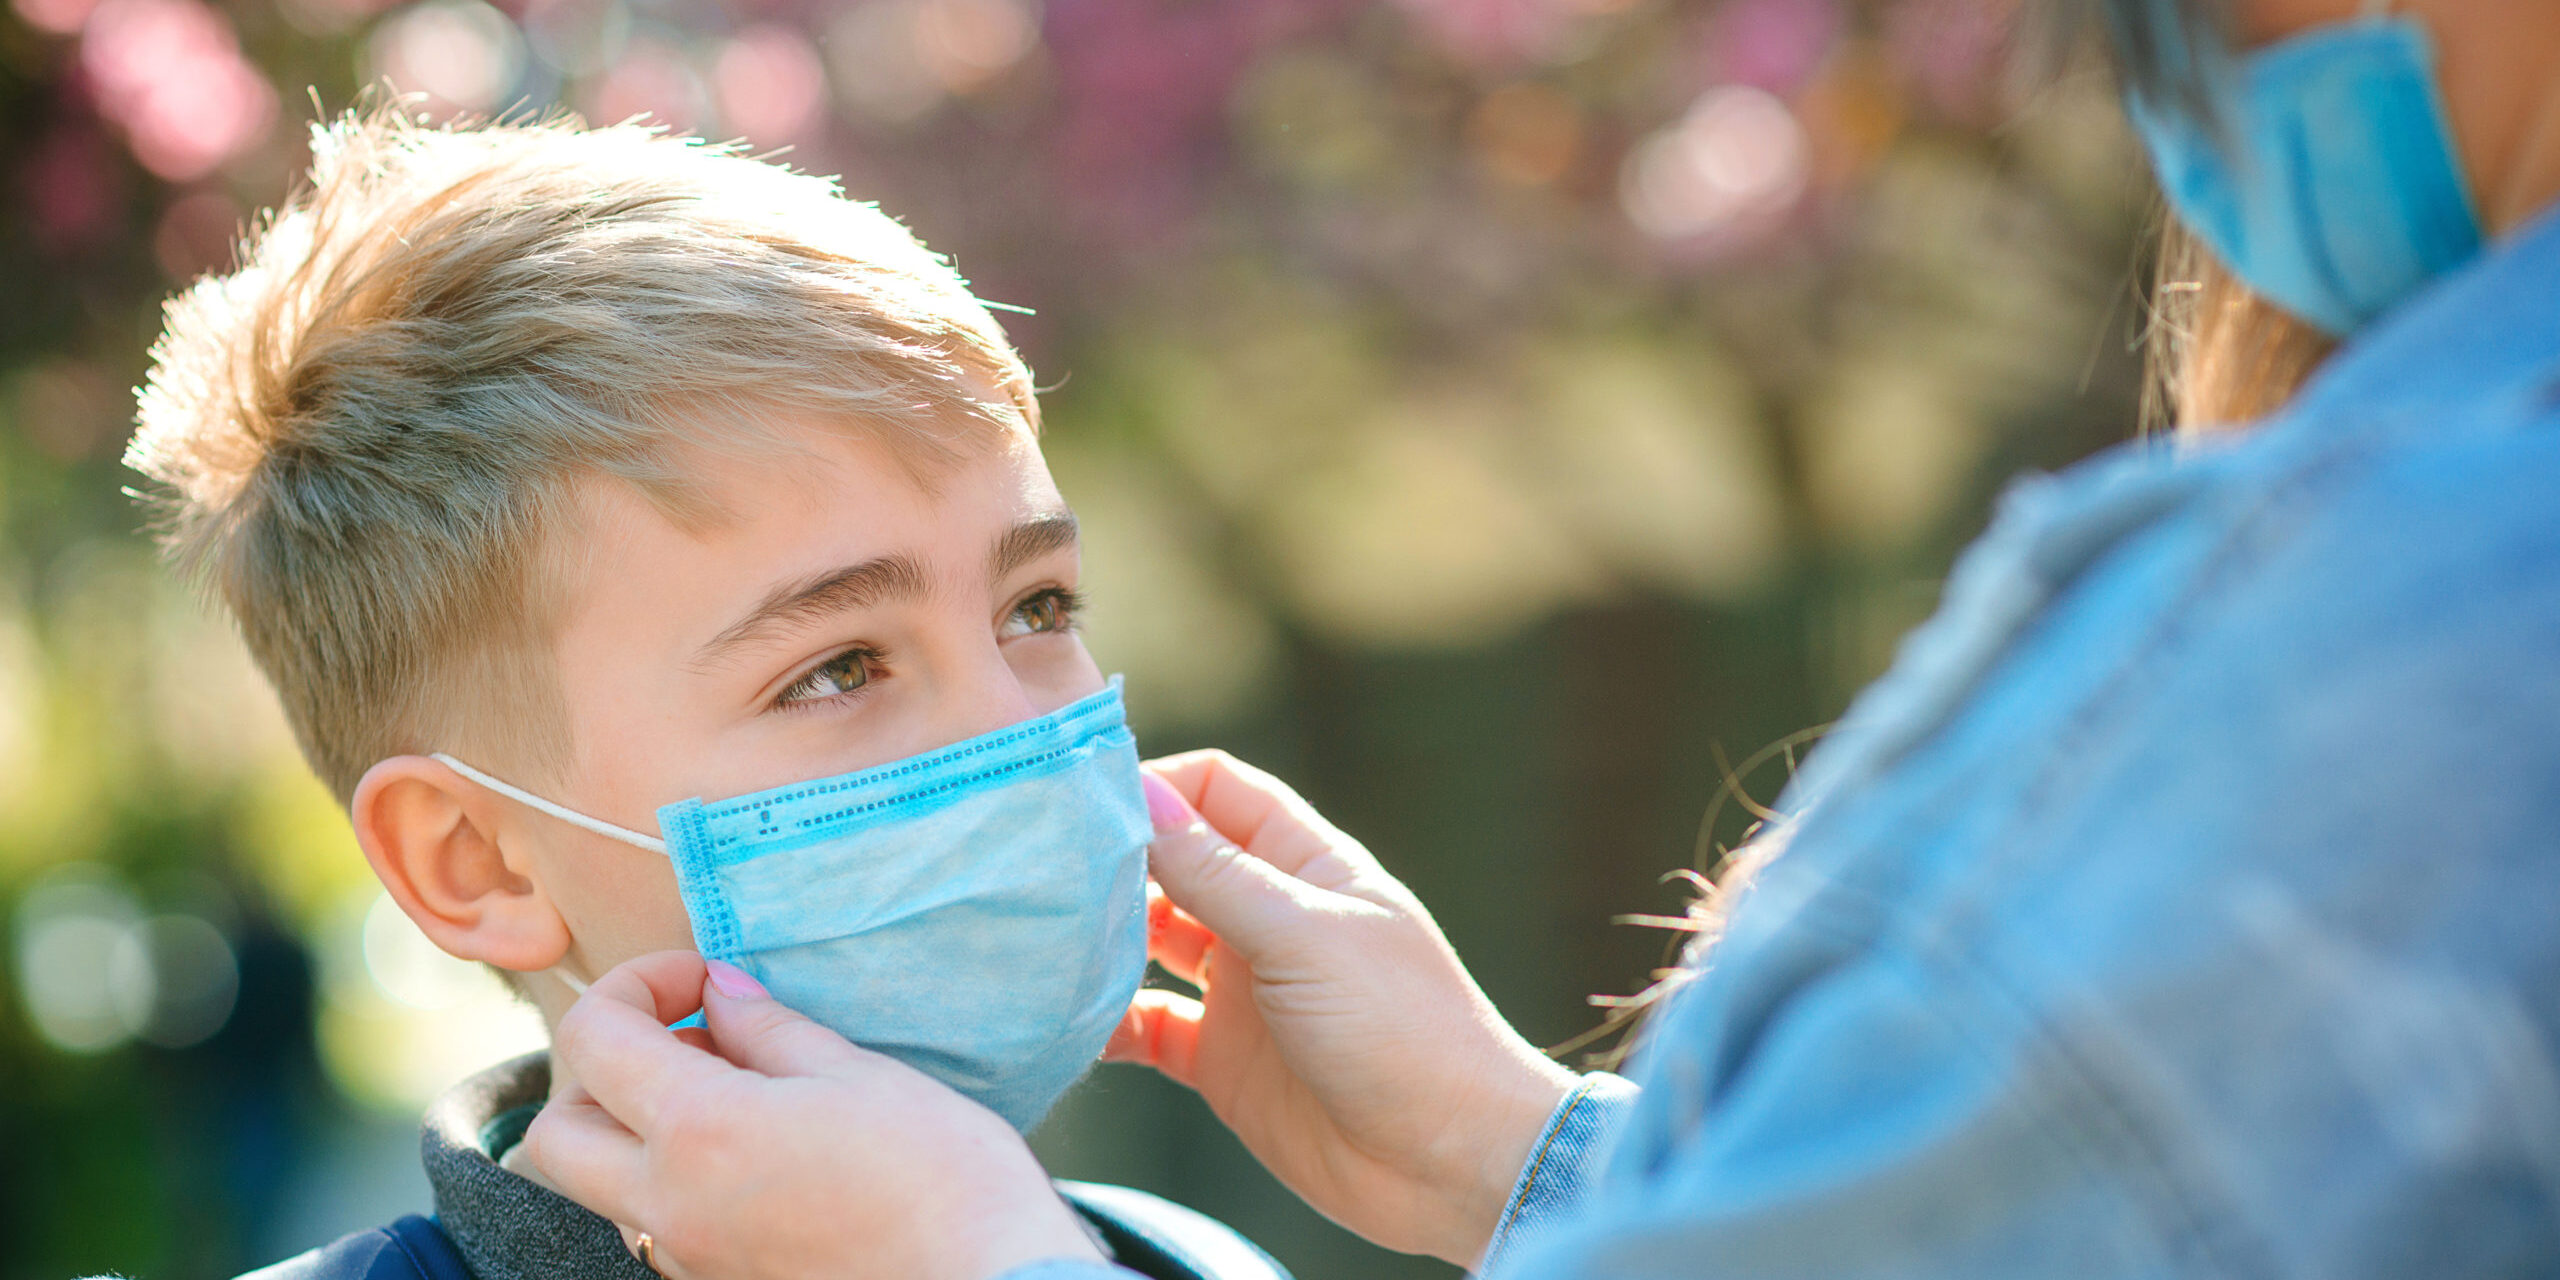 Mother puts her son a face protective mask outdoors. Coronavirus, illness, infection, quarantine, medical mask, COVID-19.